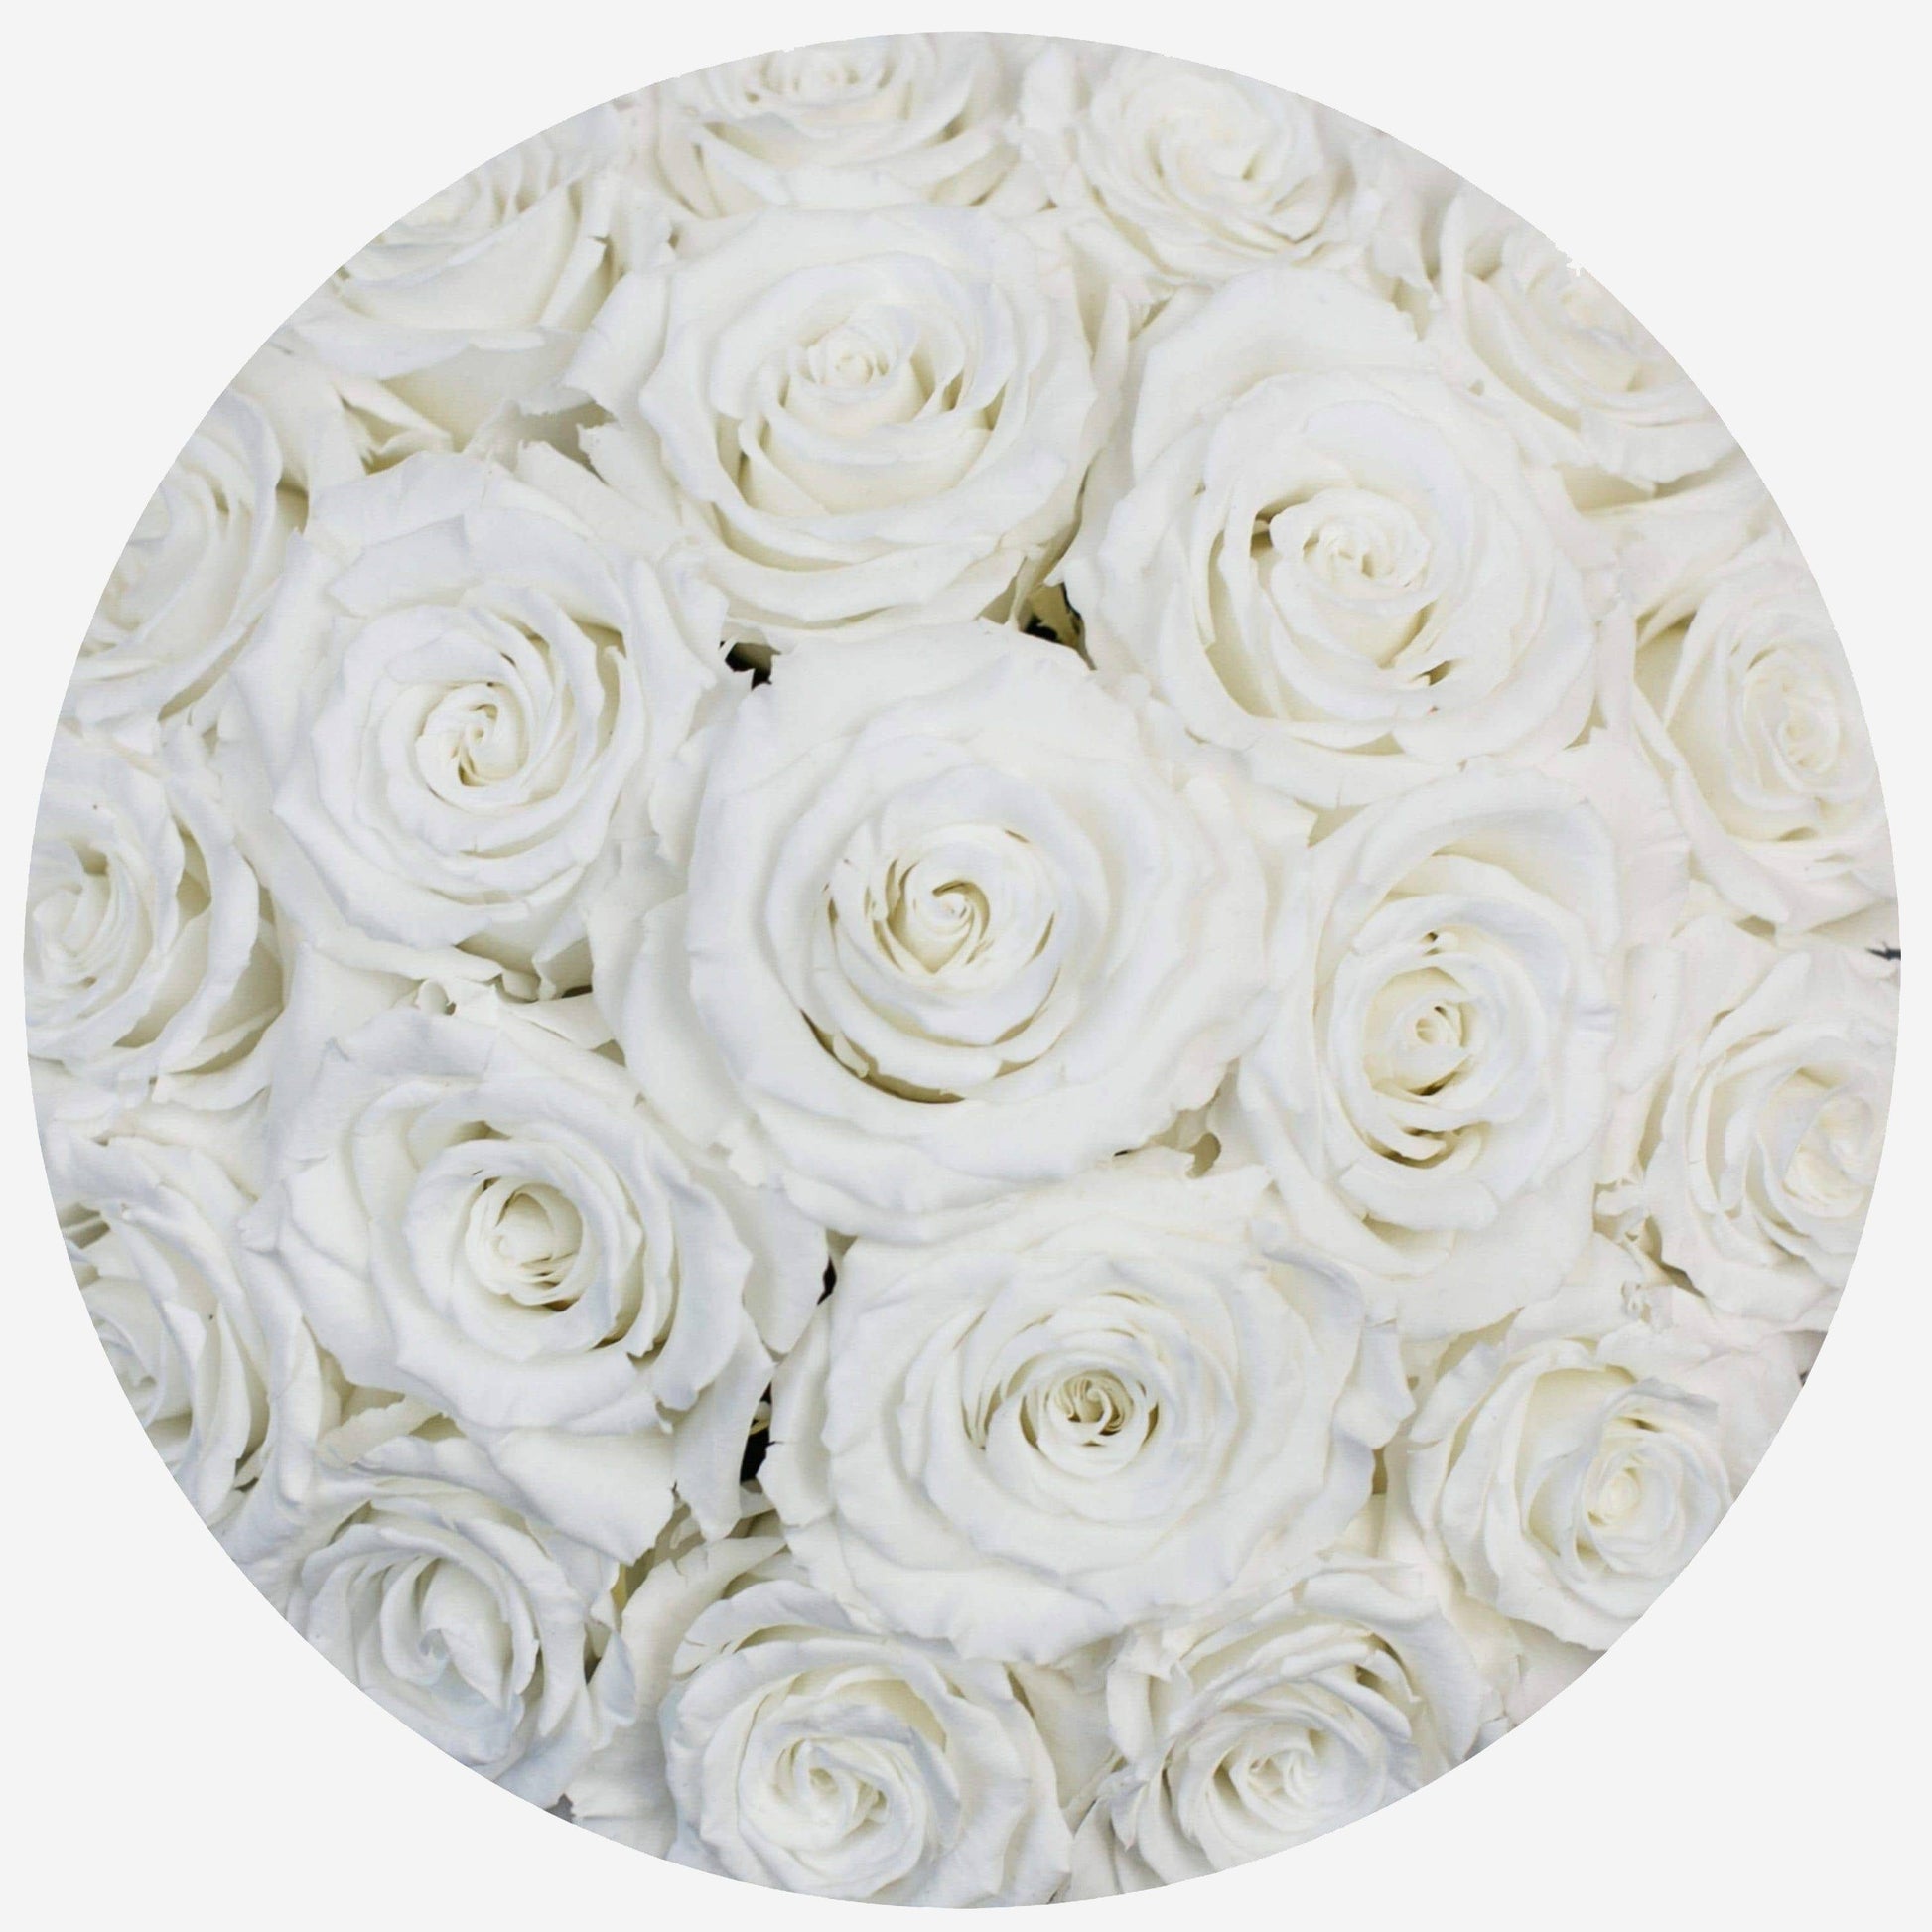 Classic Hot Pink Suede Dome Box | White Roses - The Million Roses